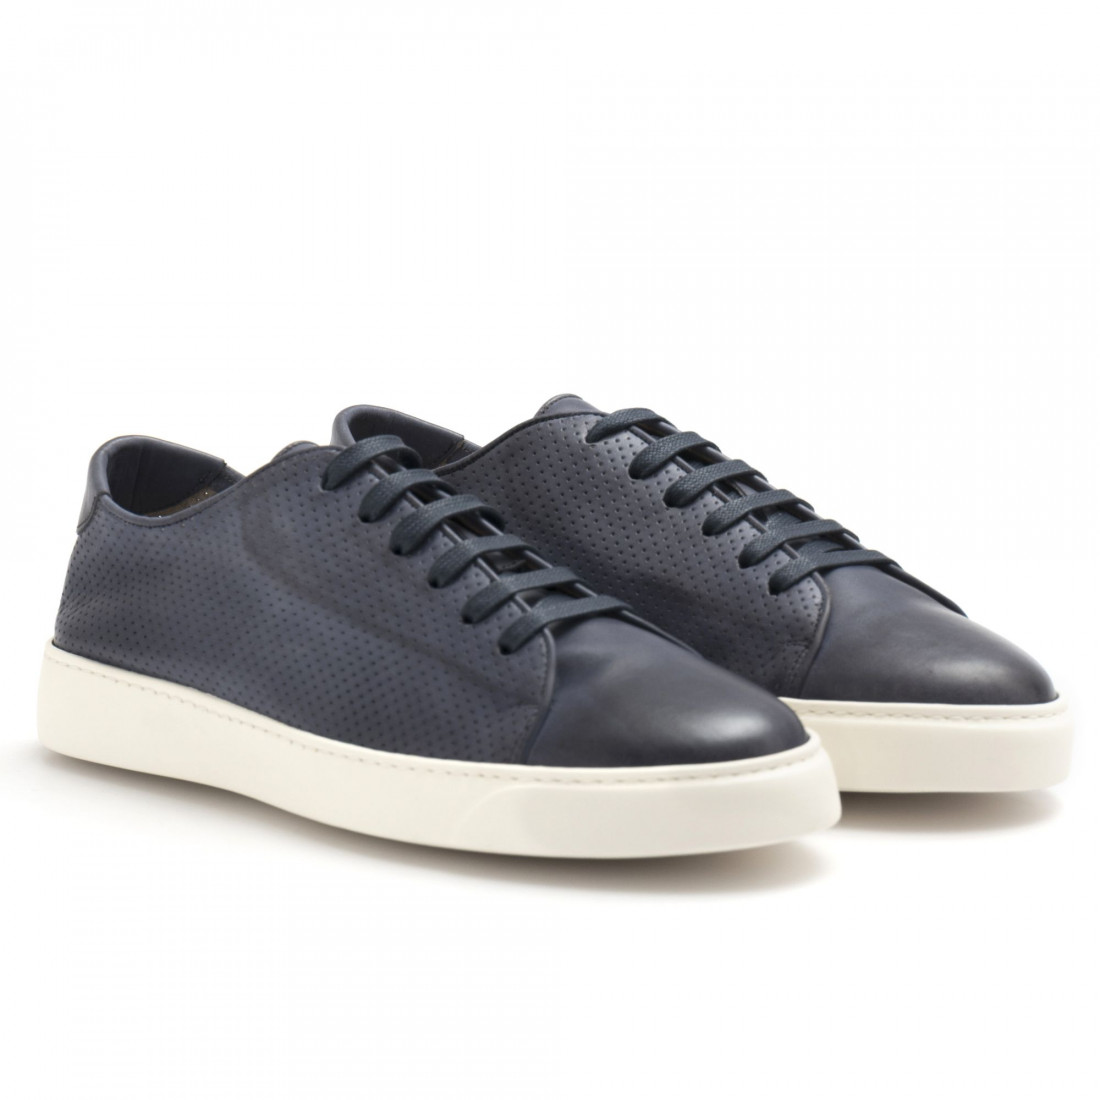 Blue perforated leather J. Wilton sneakers